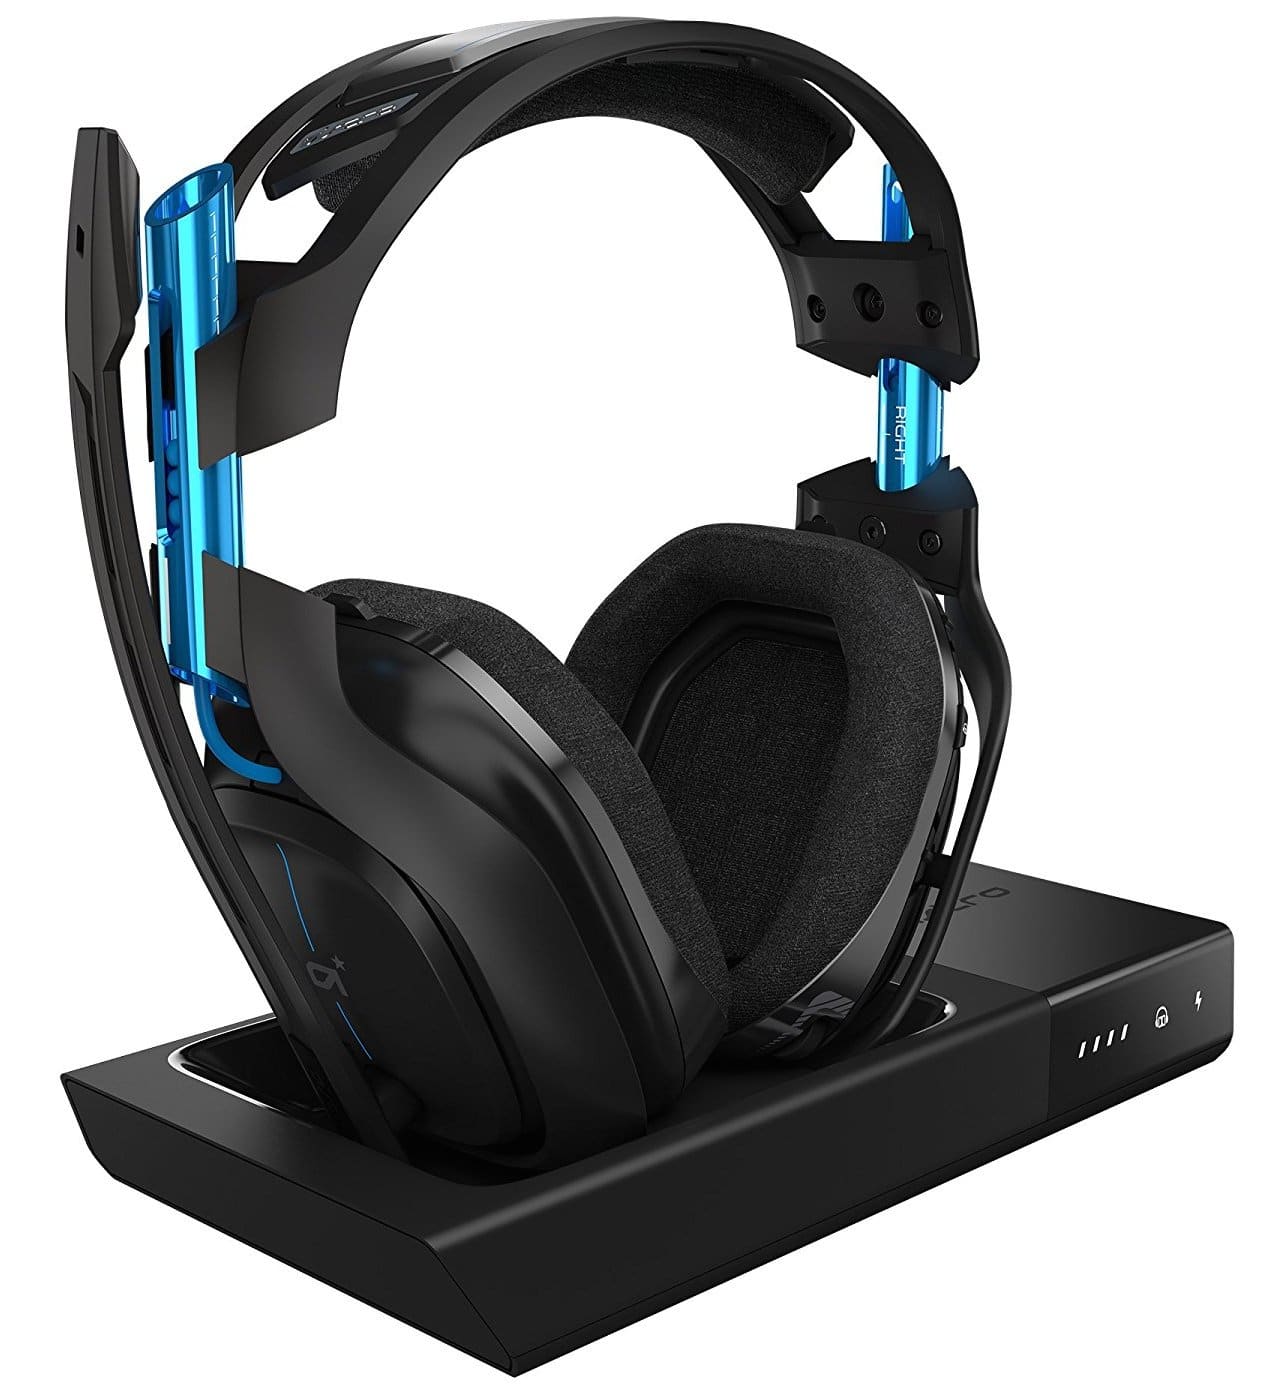 Best Gaming Headsets 2017: Astro a50 Review